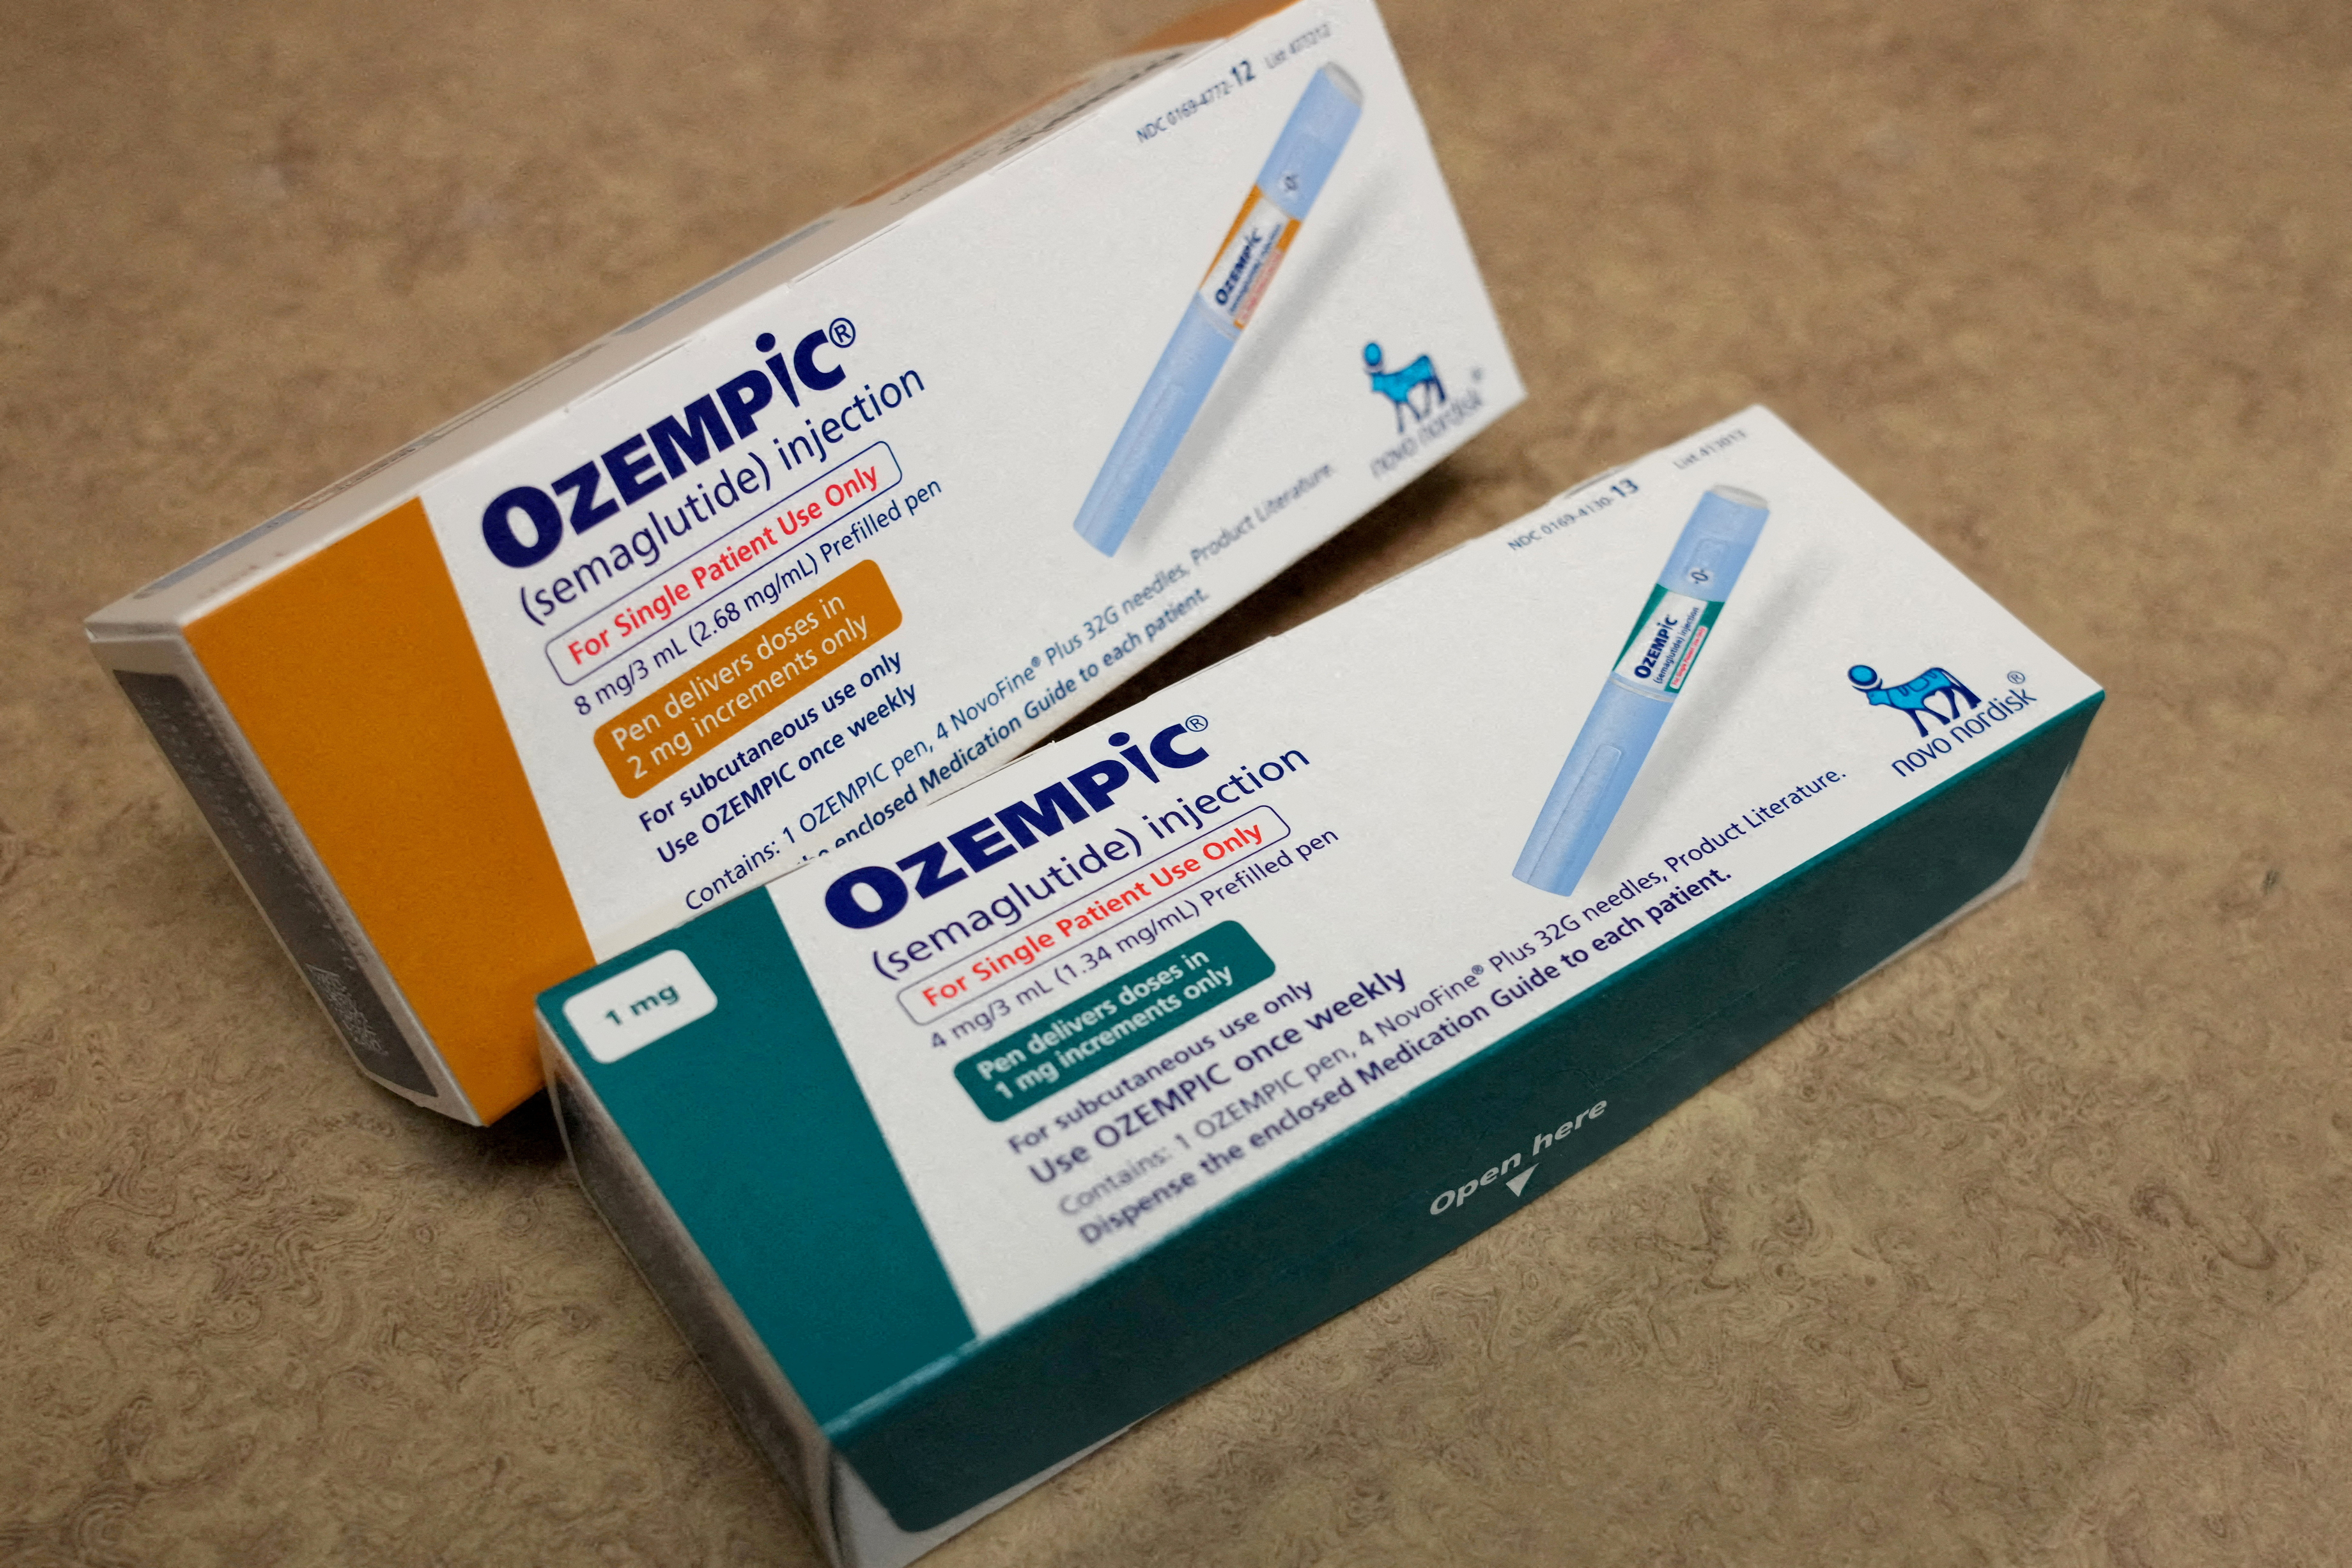 FDA says fake Ozempic shots are being sold. What to know